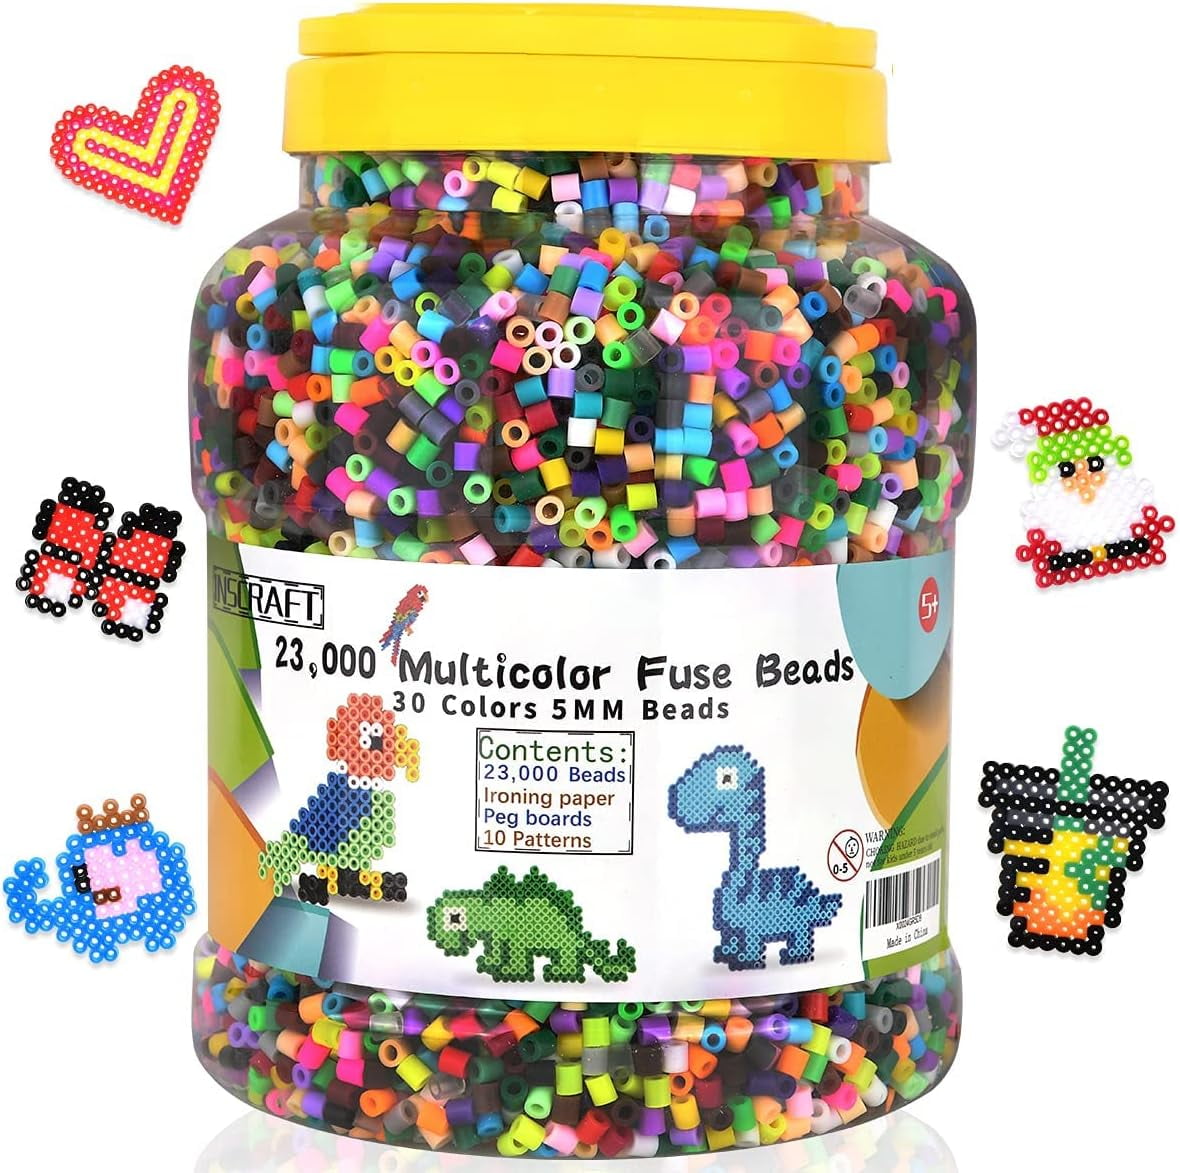 23,000 Pcs Fuse Beads Kit for Kids Crafts, 30 Colors Iron Beads Set with 3 Pegboards, 5 Ironing Paper, 10 Patterns, Gifts for Birthday Christmas 5mm